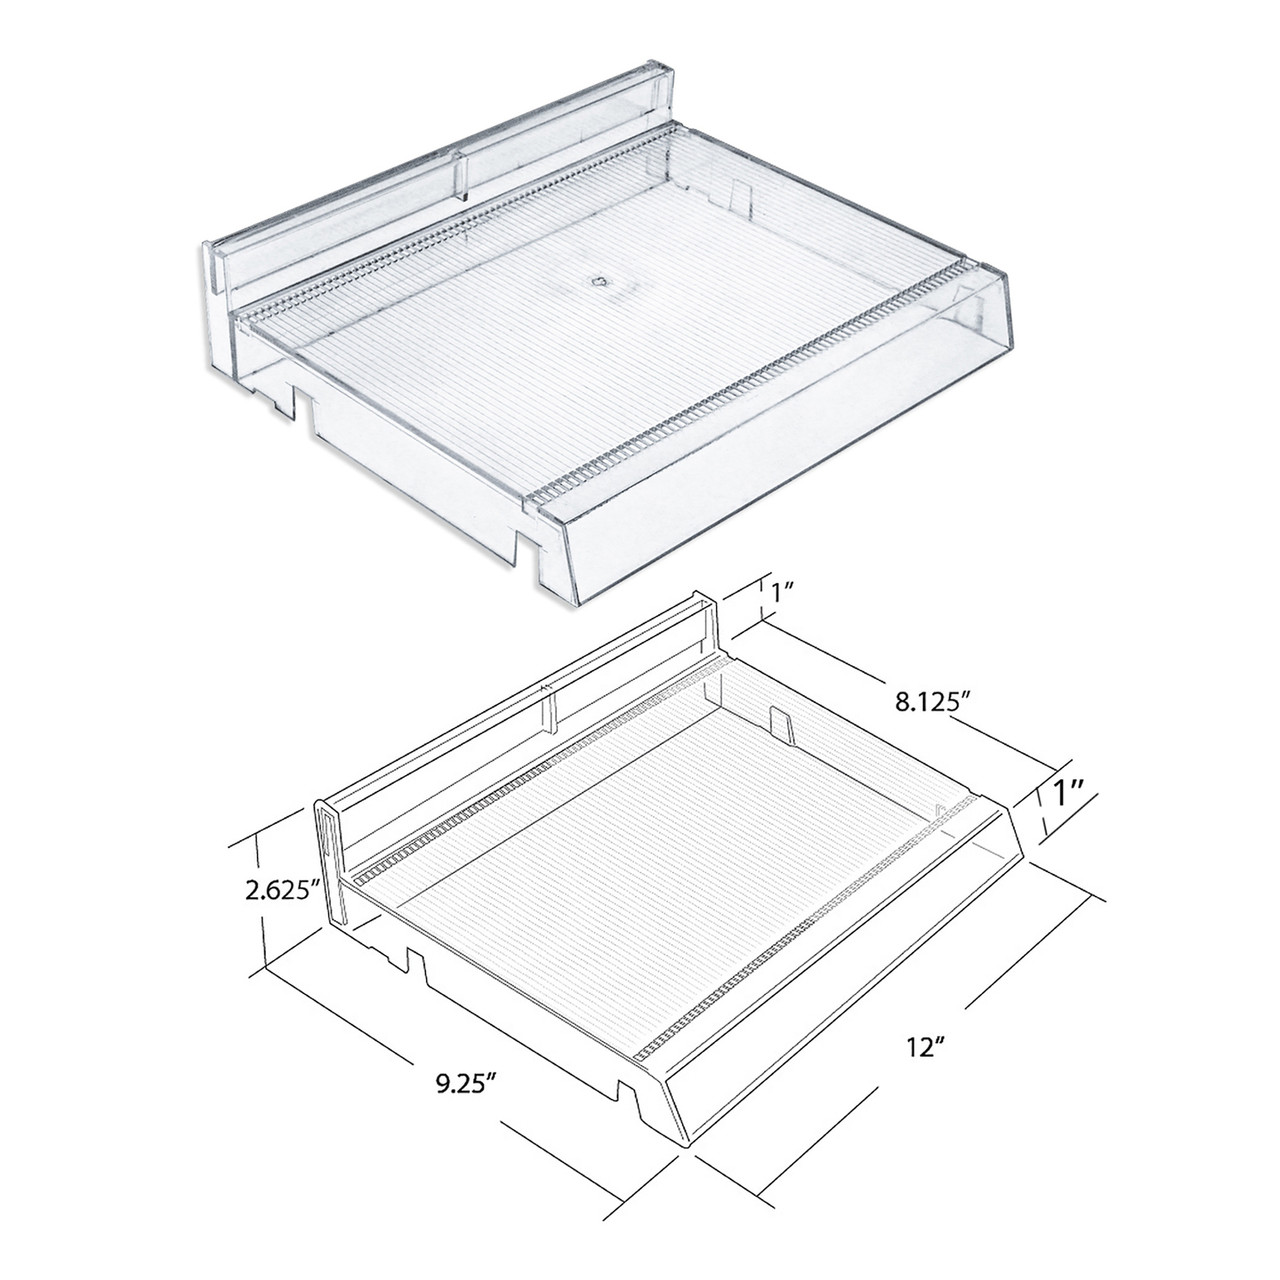 Sorting Tray (6 compartments) (W92331 )